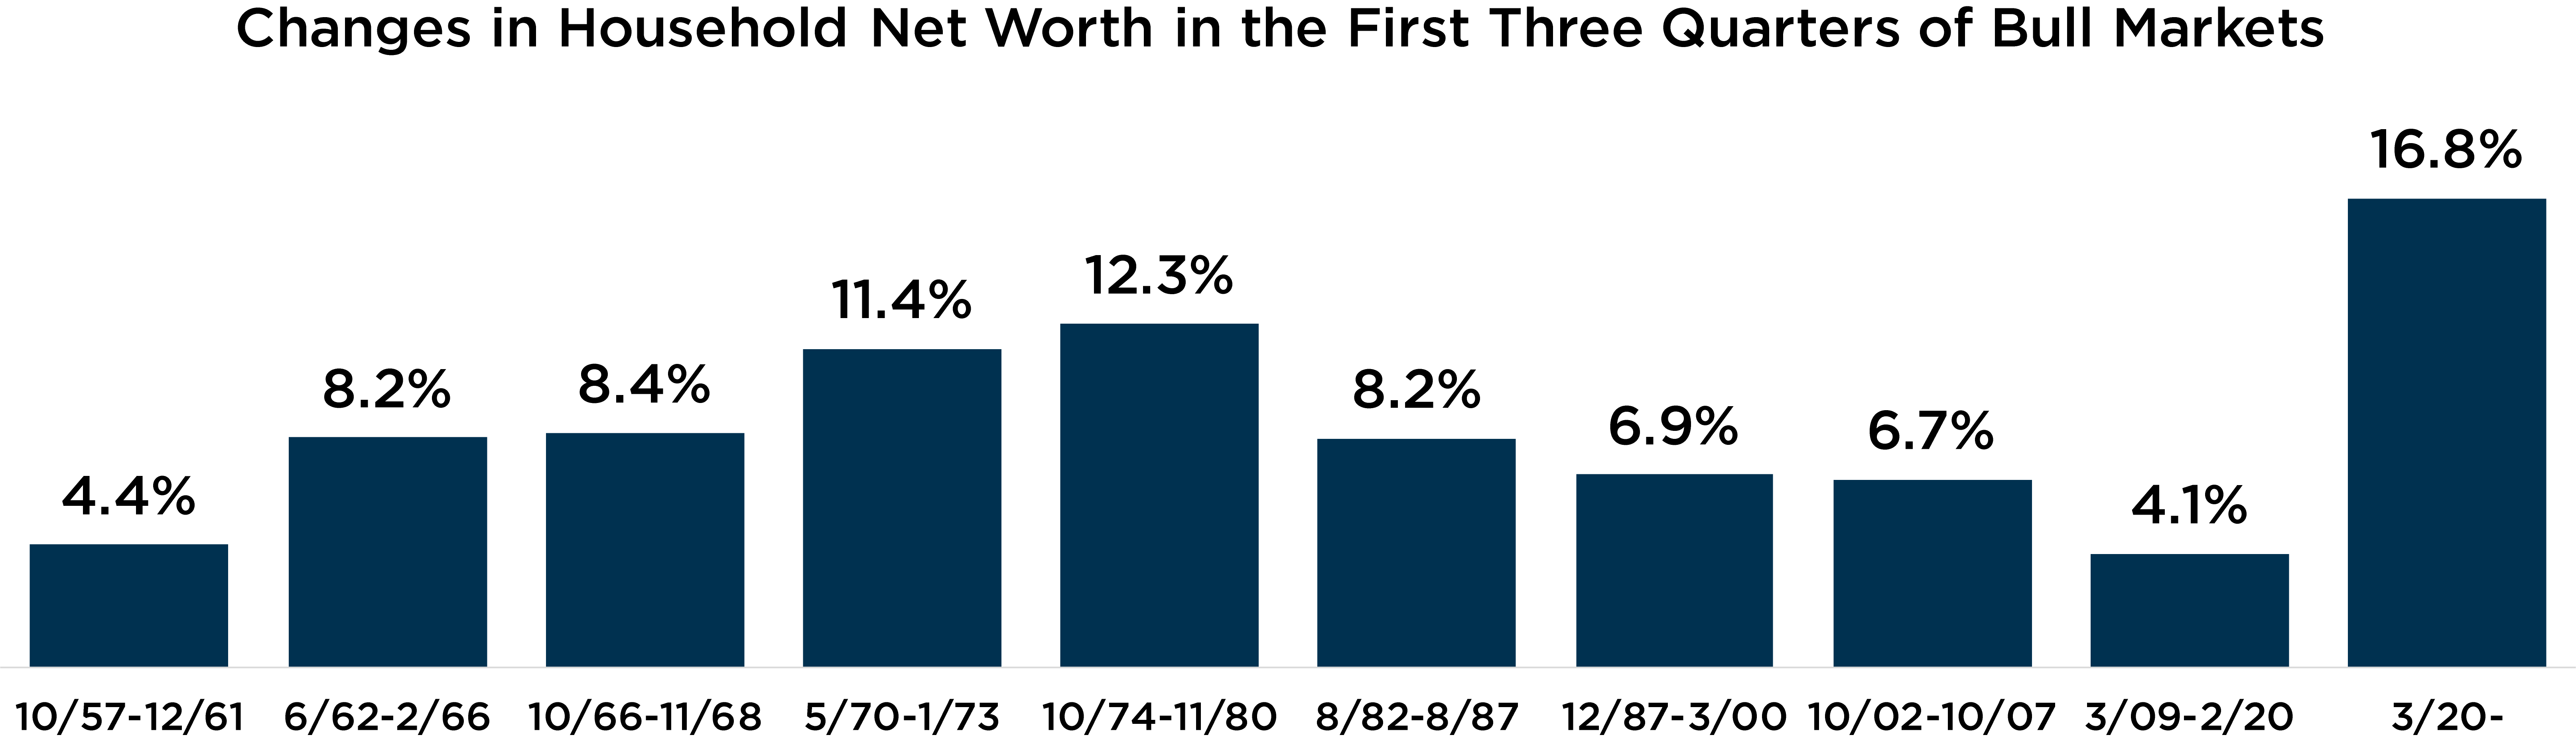 Graph depicting changes in household net worth in the first three quarters of bull markets